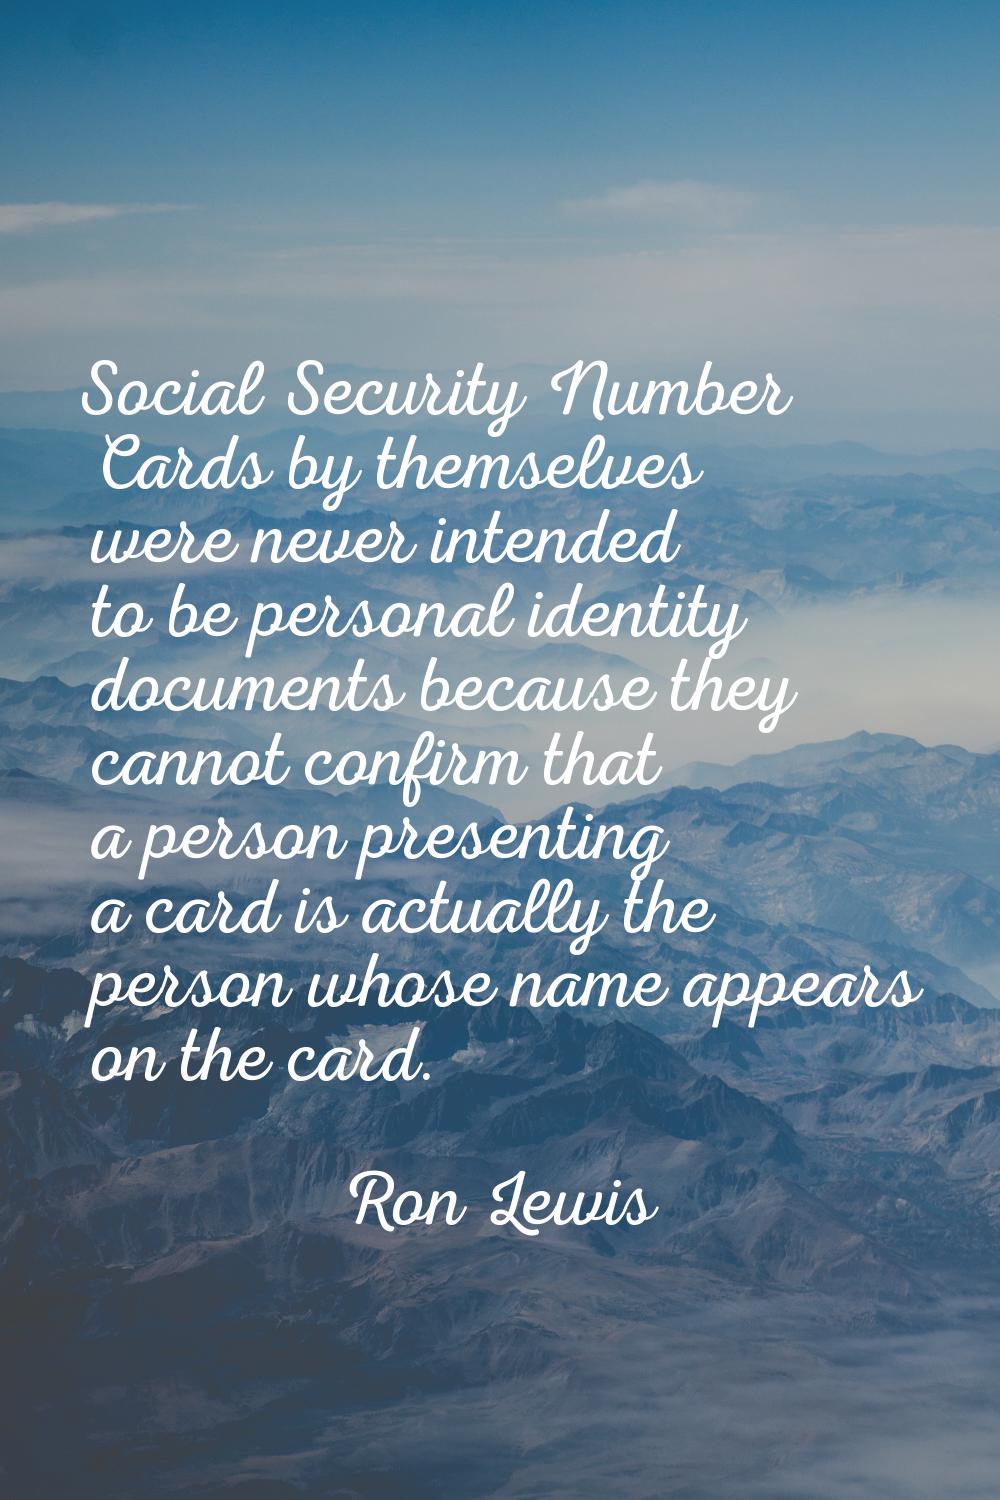 Social Security Number Cards by themselves were never intended to be personal identity documents be